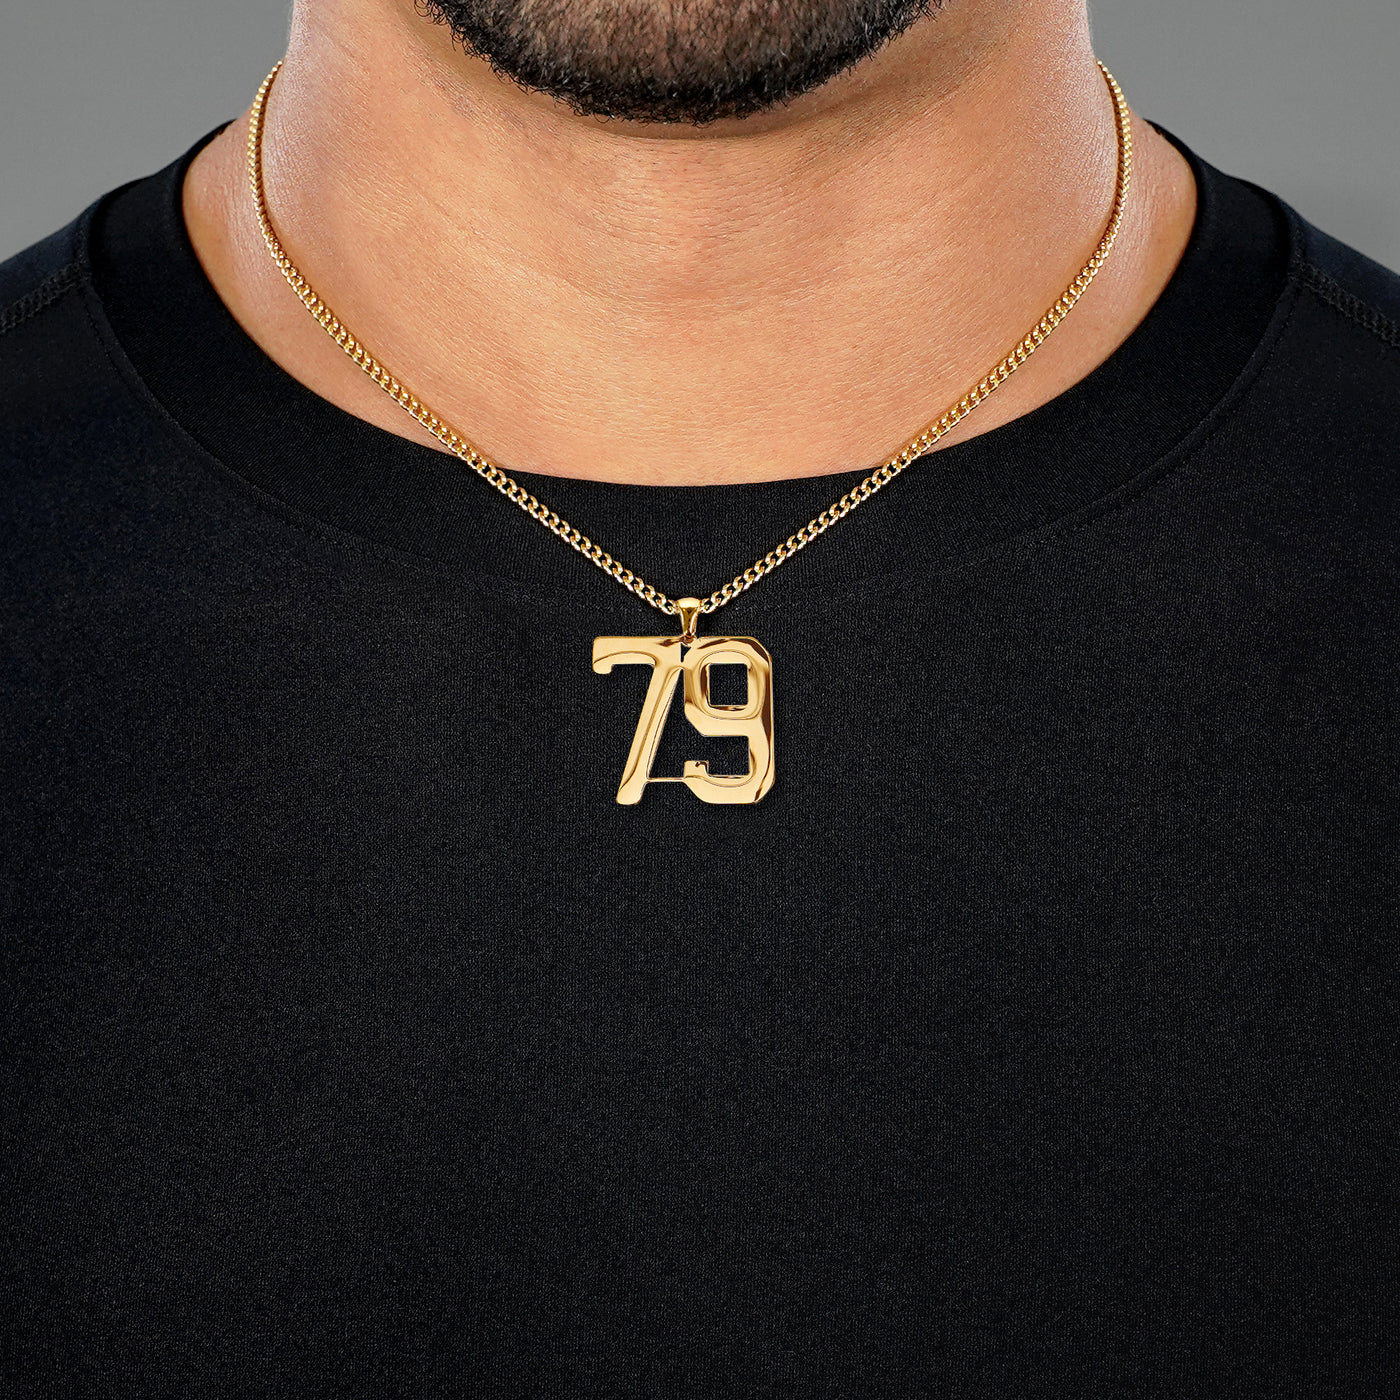 79 Number Pendant with Chain Necklace - Gold Plated Stainless Steel